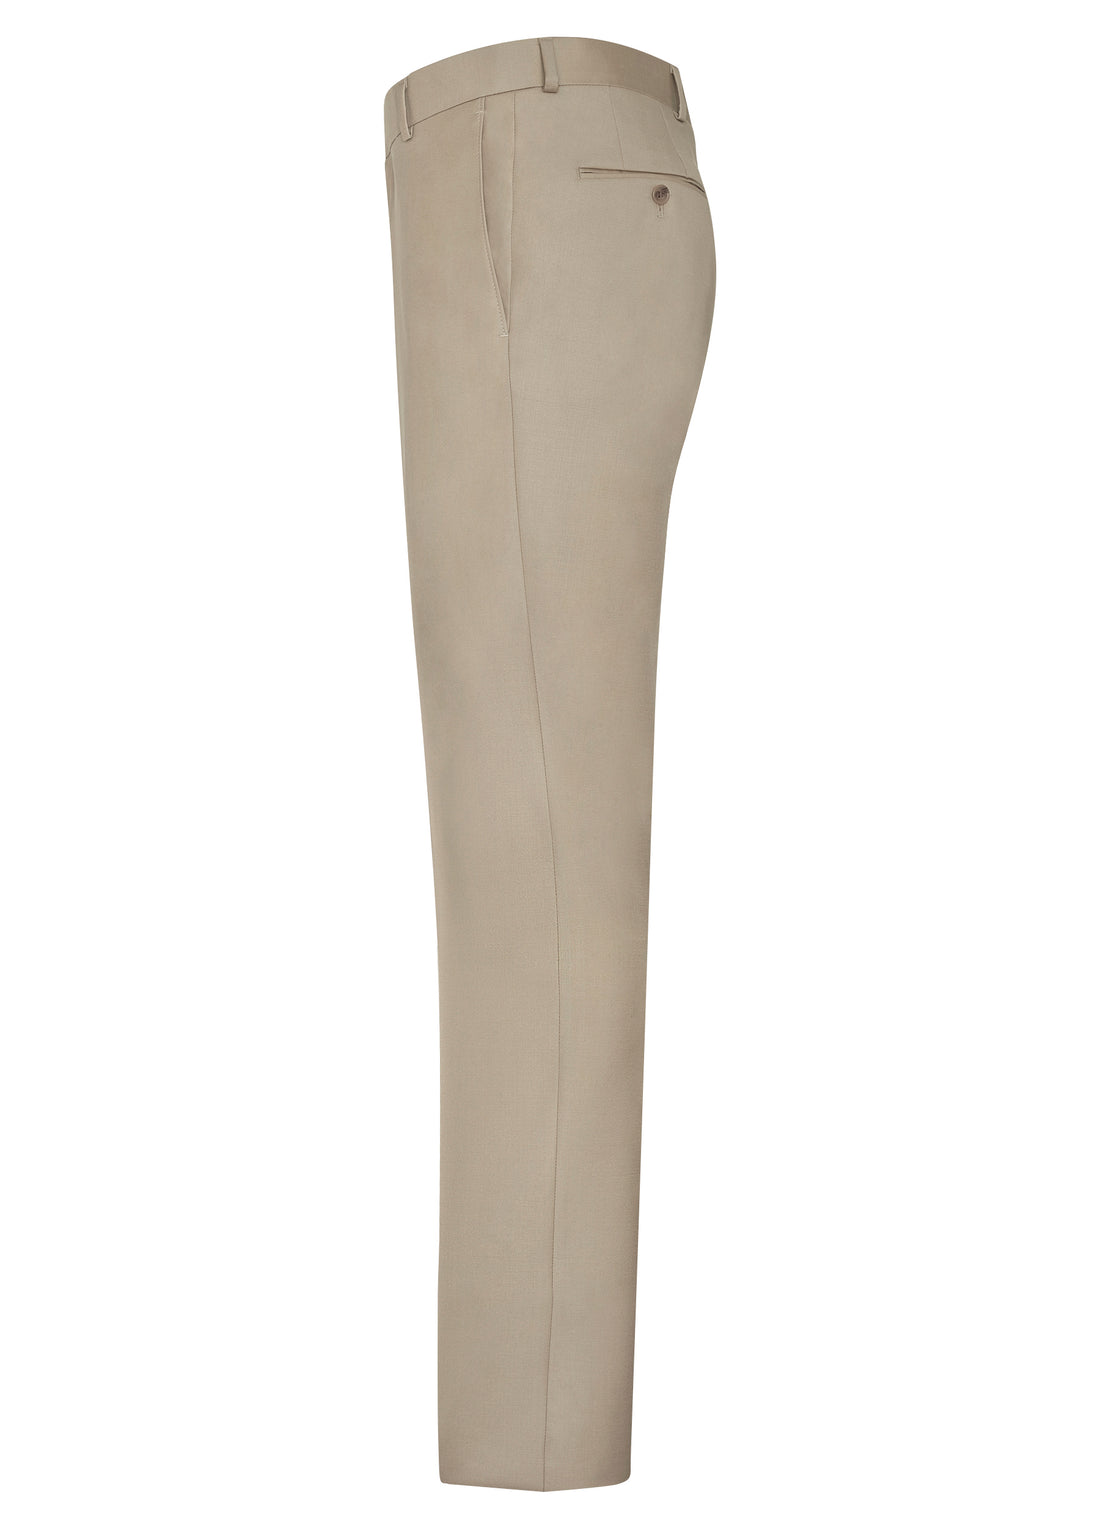 Taupe Flat Front Trousers - Classic Fit Taupe Flat Front Trousers - Classic Fit 